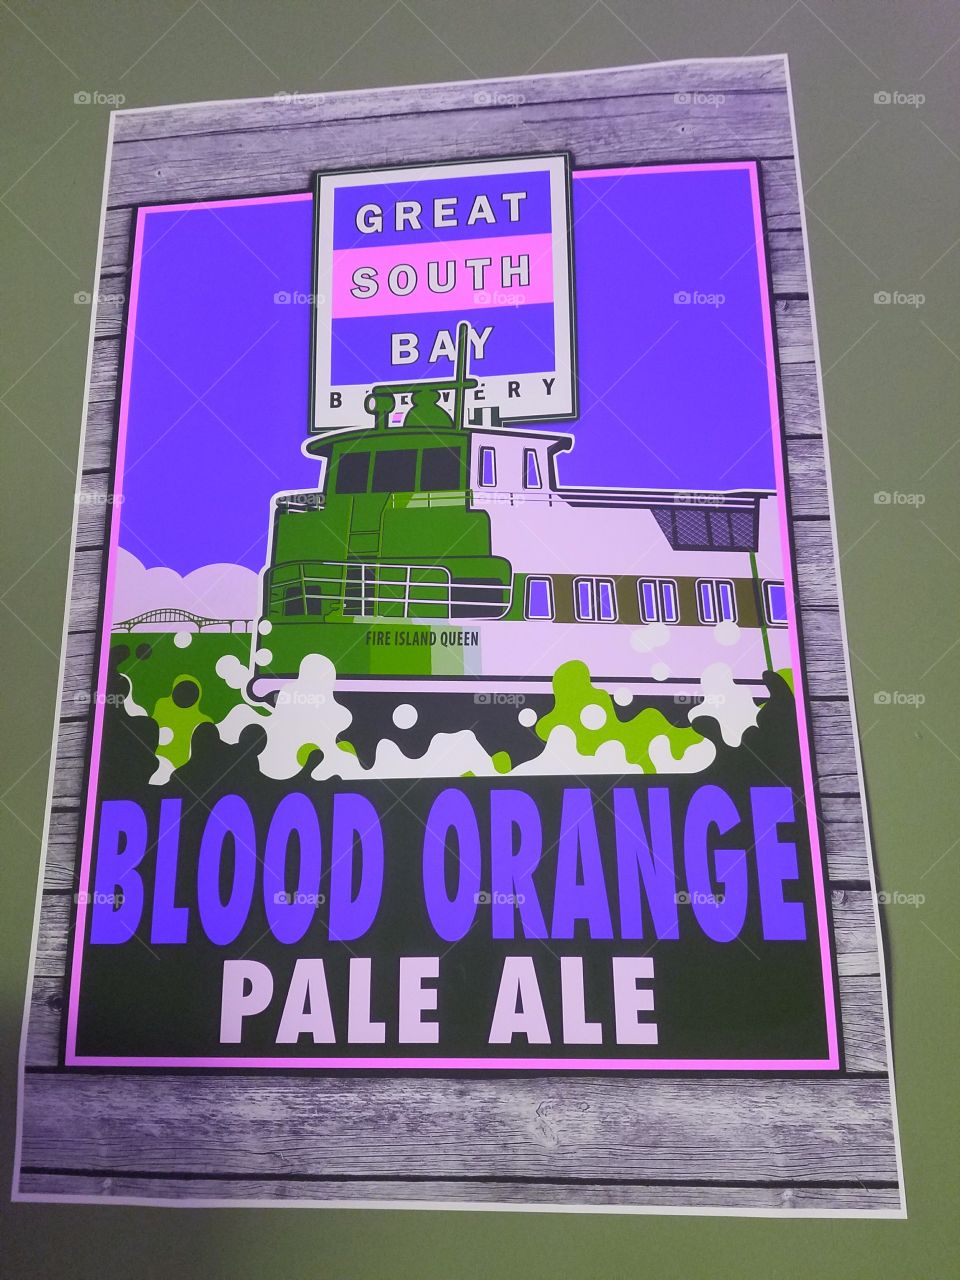 Great South Bay Brewery Blood Orange Pale Ale Advertisement